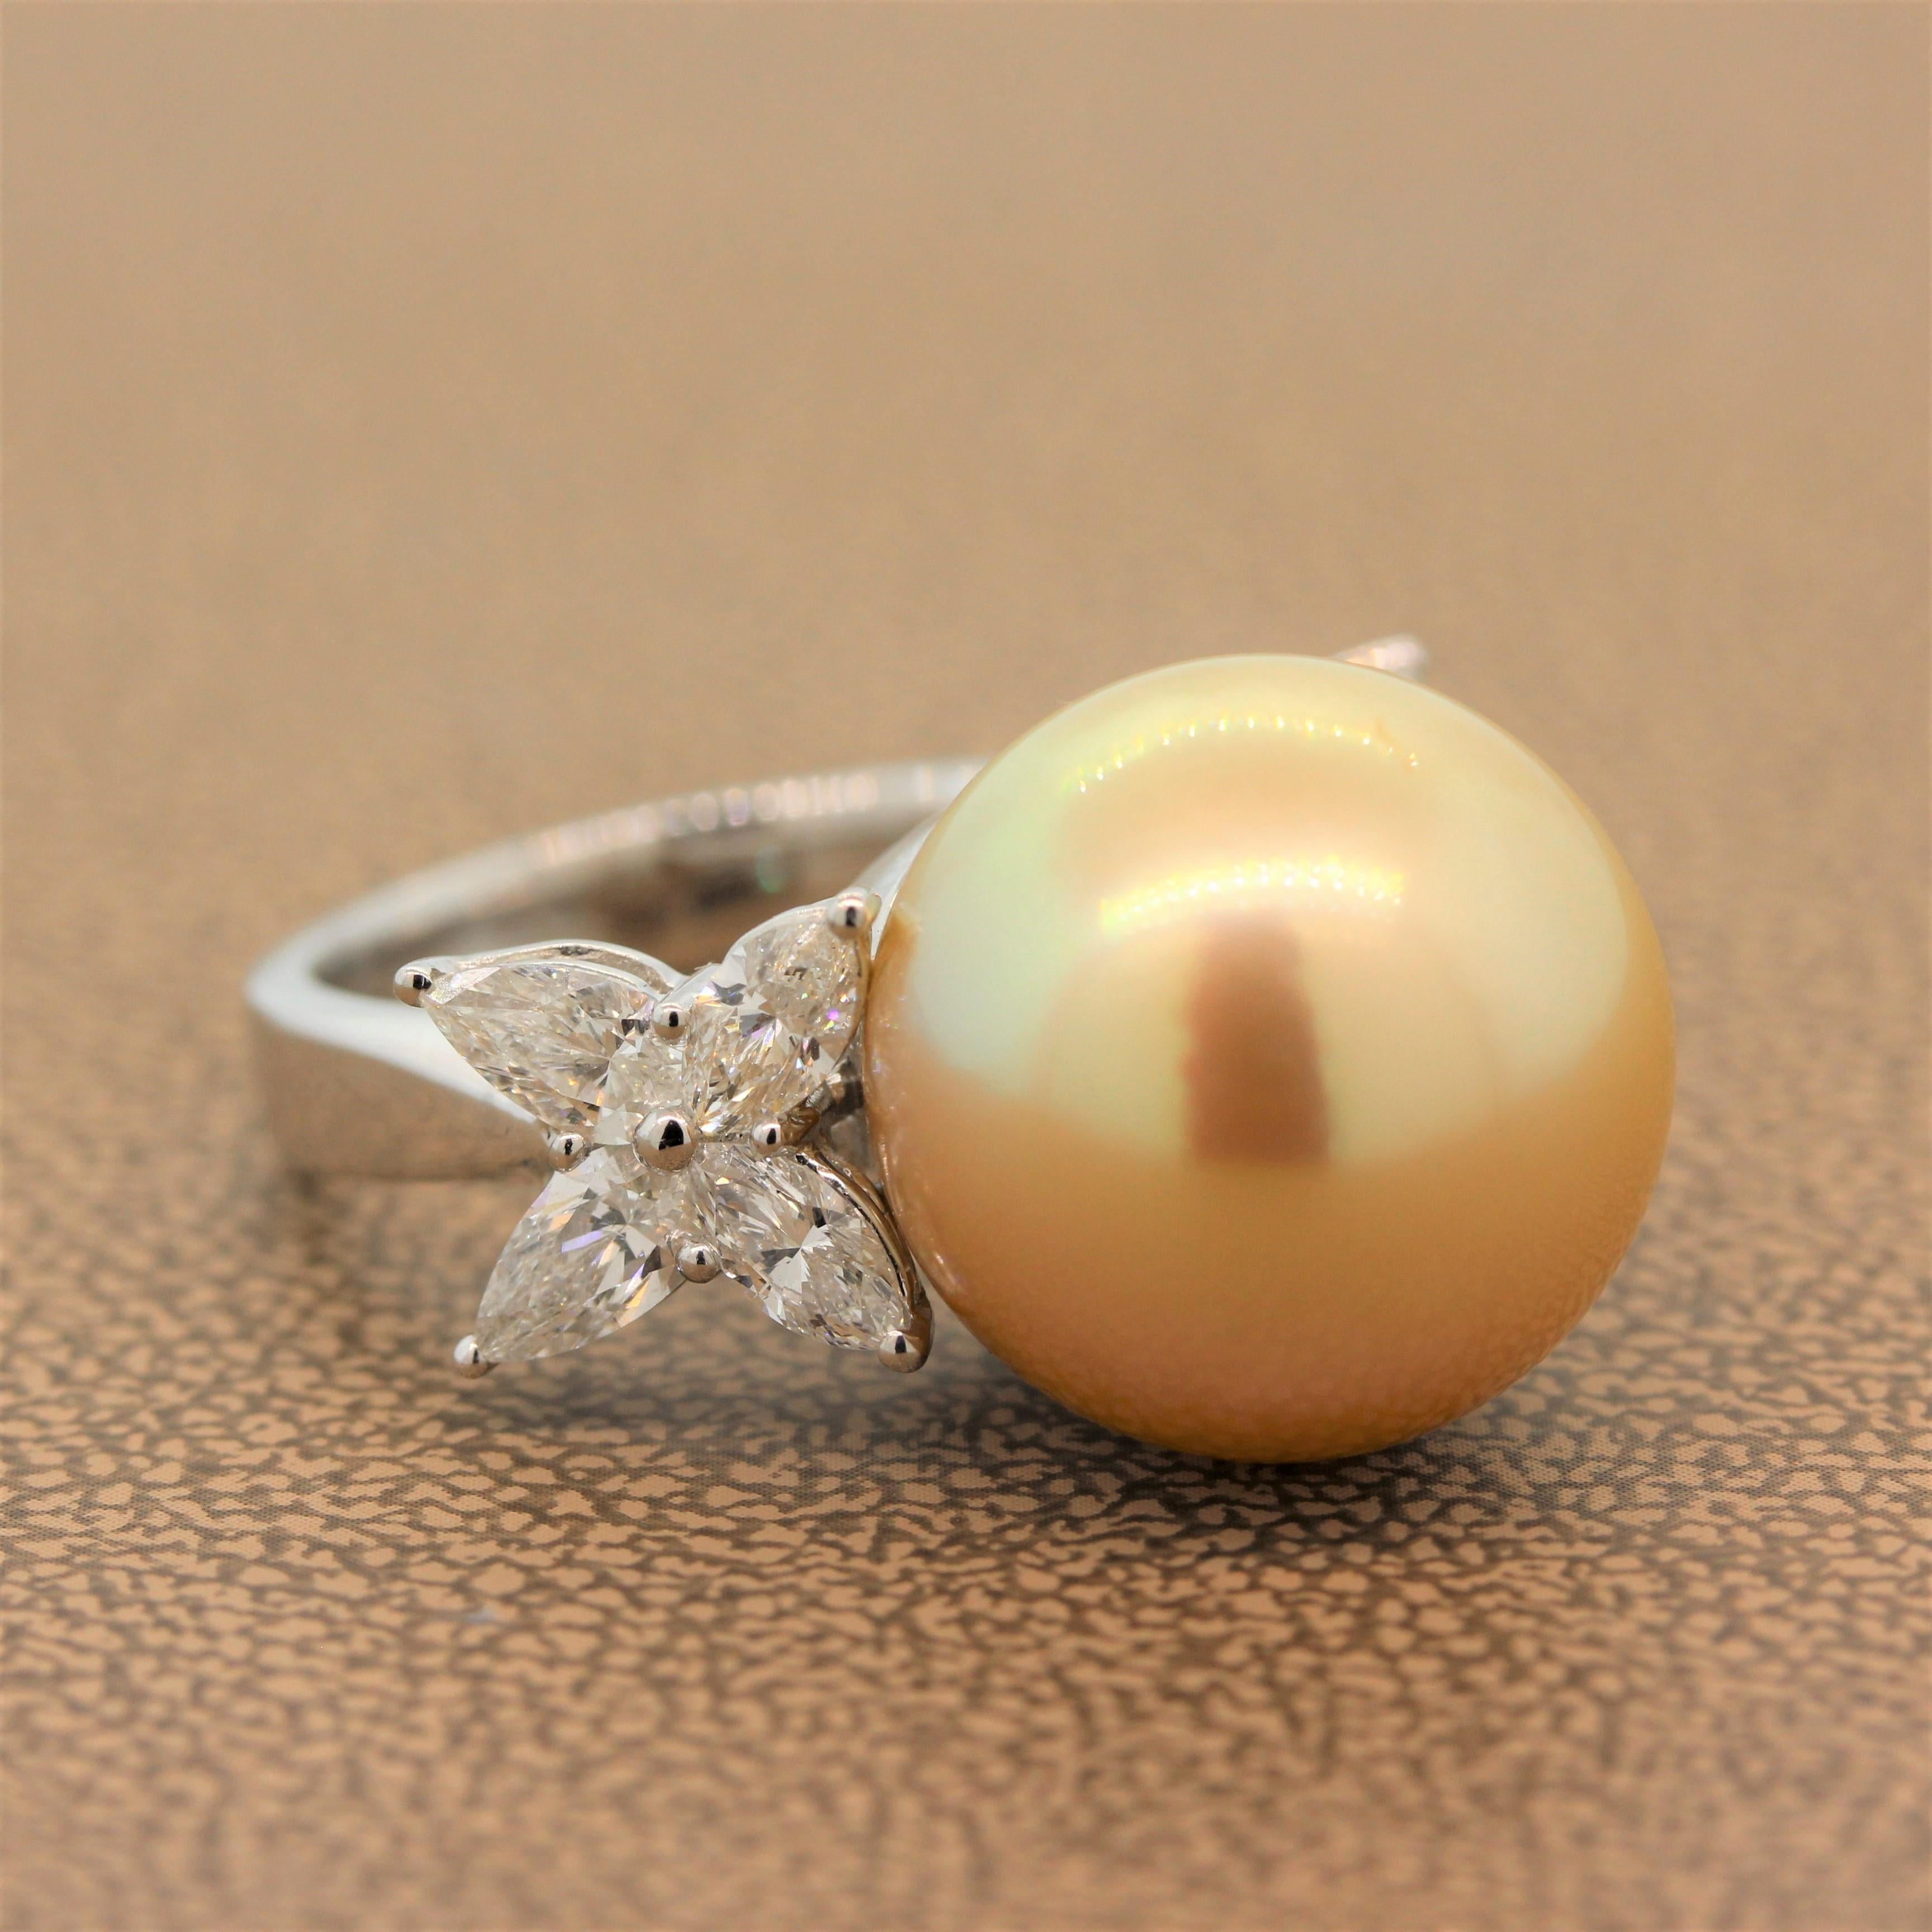 A lustrously shining 16.5mm golden South Sea pearl sits between two clusters of 1.70 carats of diamond clusters of marquise cut and pear cut diamonds. This indulgent ring is set in 18K white gold.

Ring Size 6.5 (Sizable)